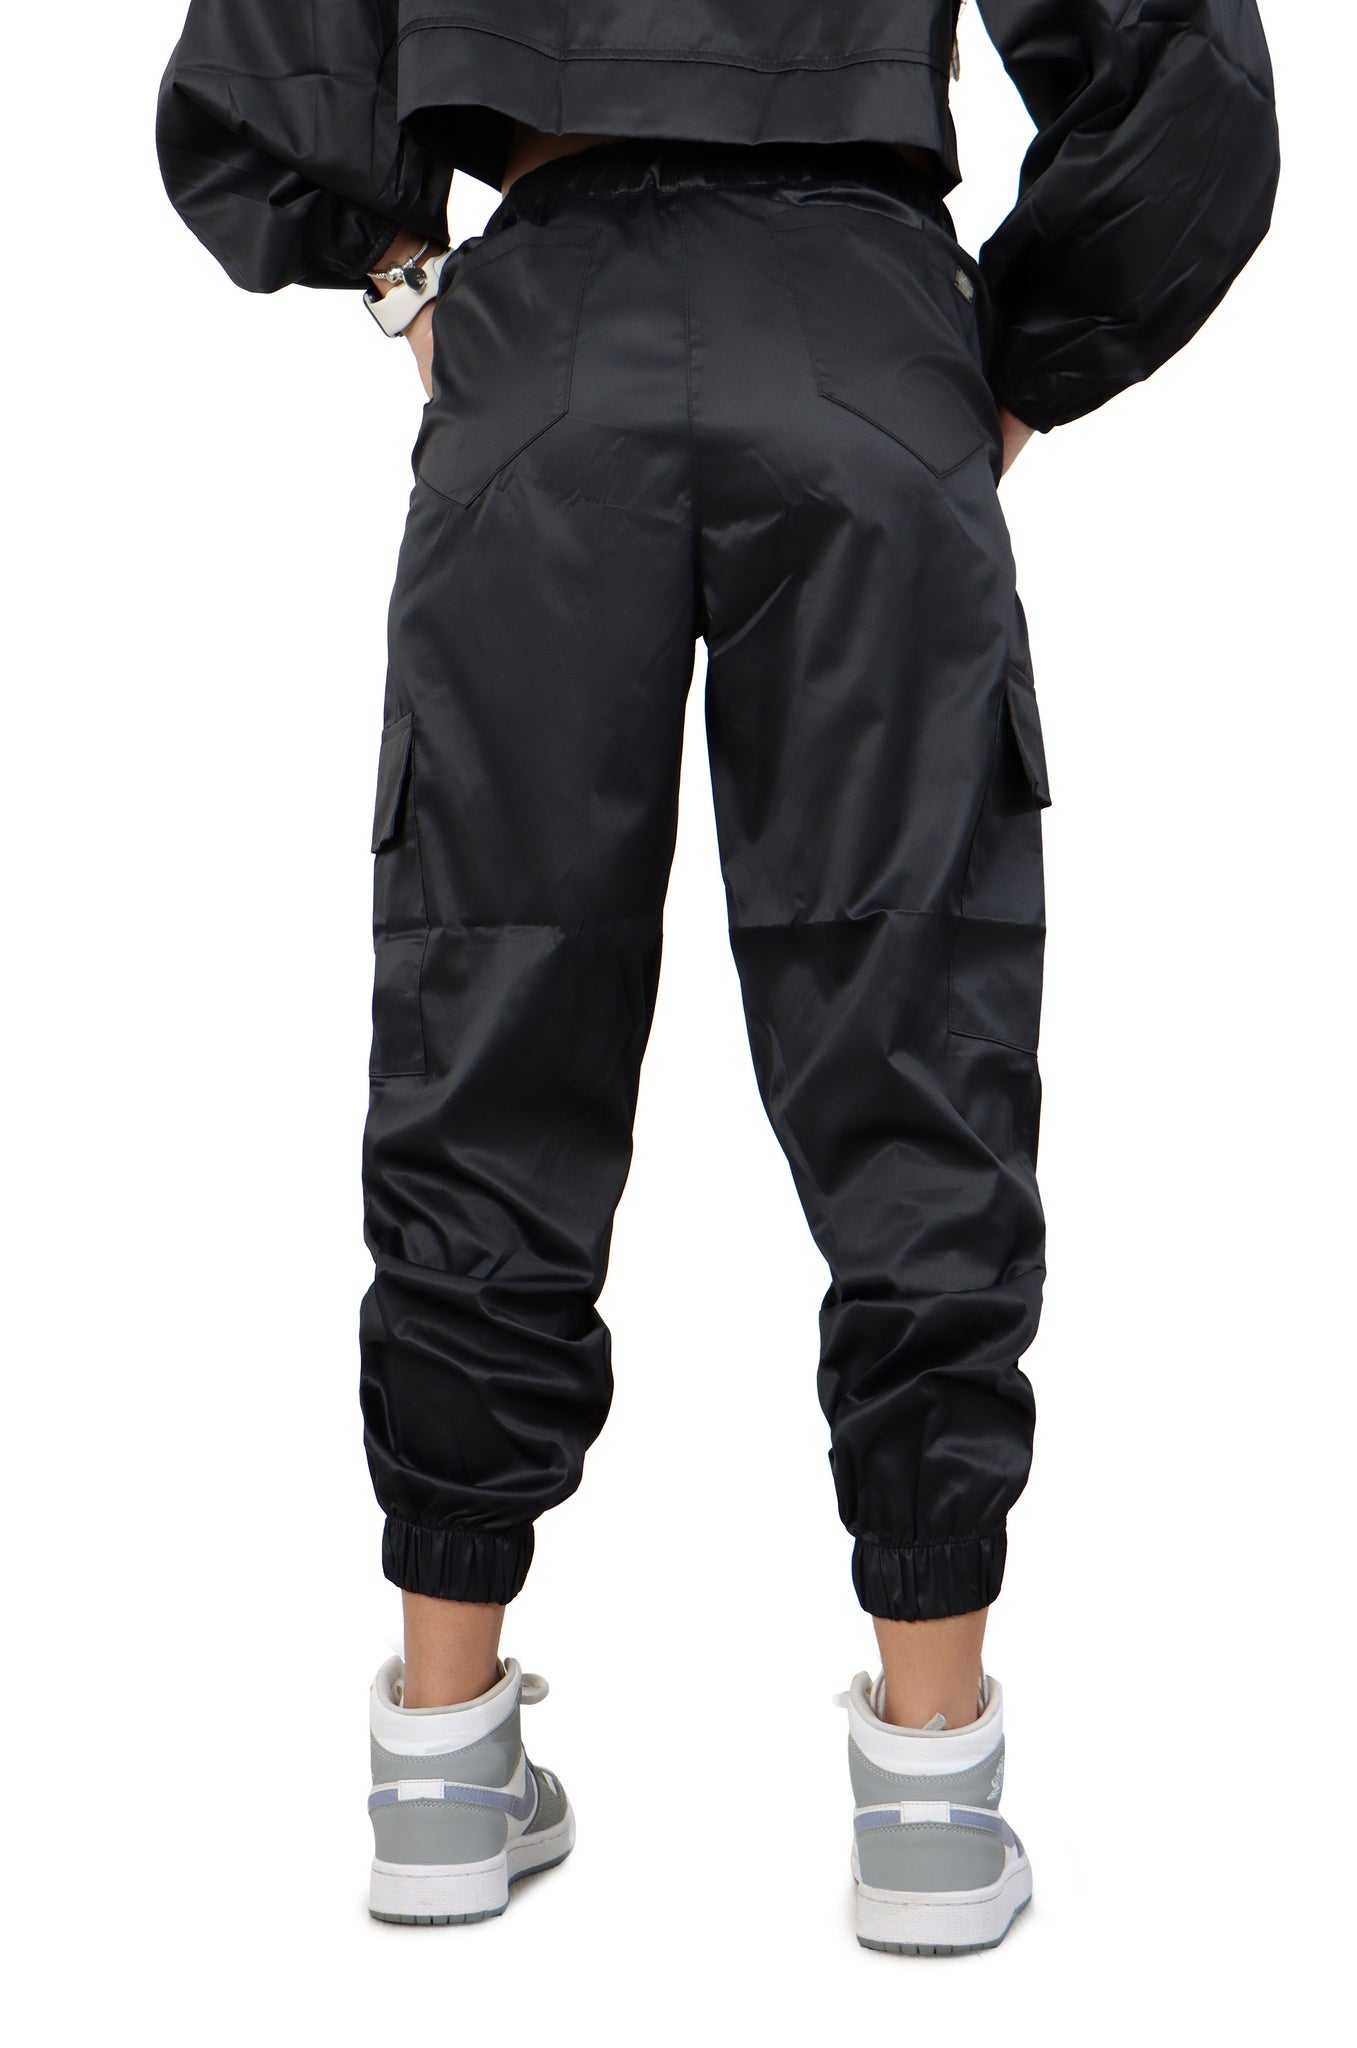 Conjunto Mujer Impermeable Deportivo Chompa y Jogger - P50035